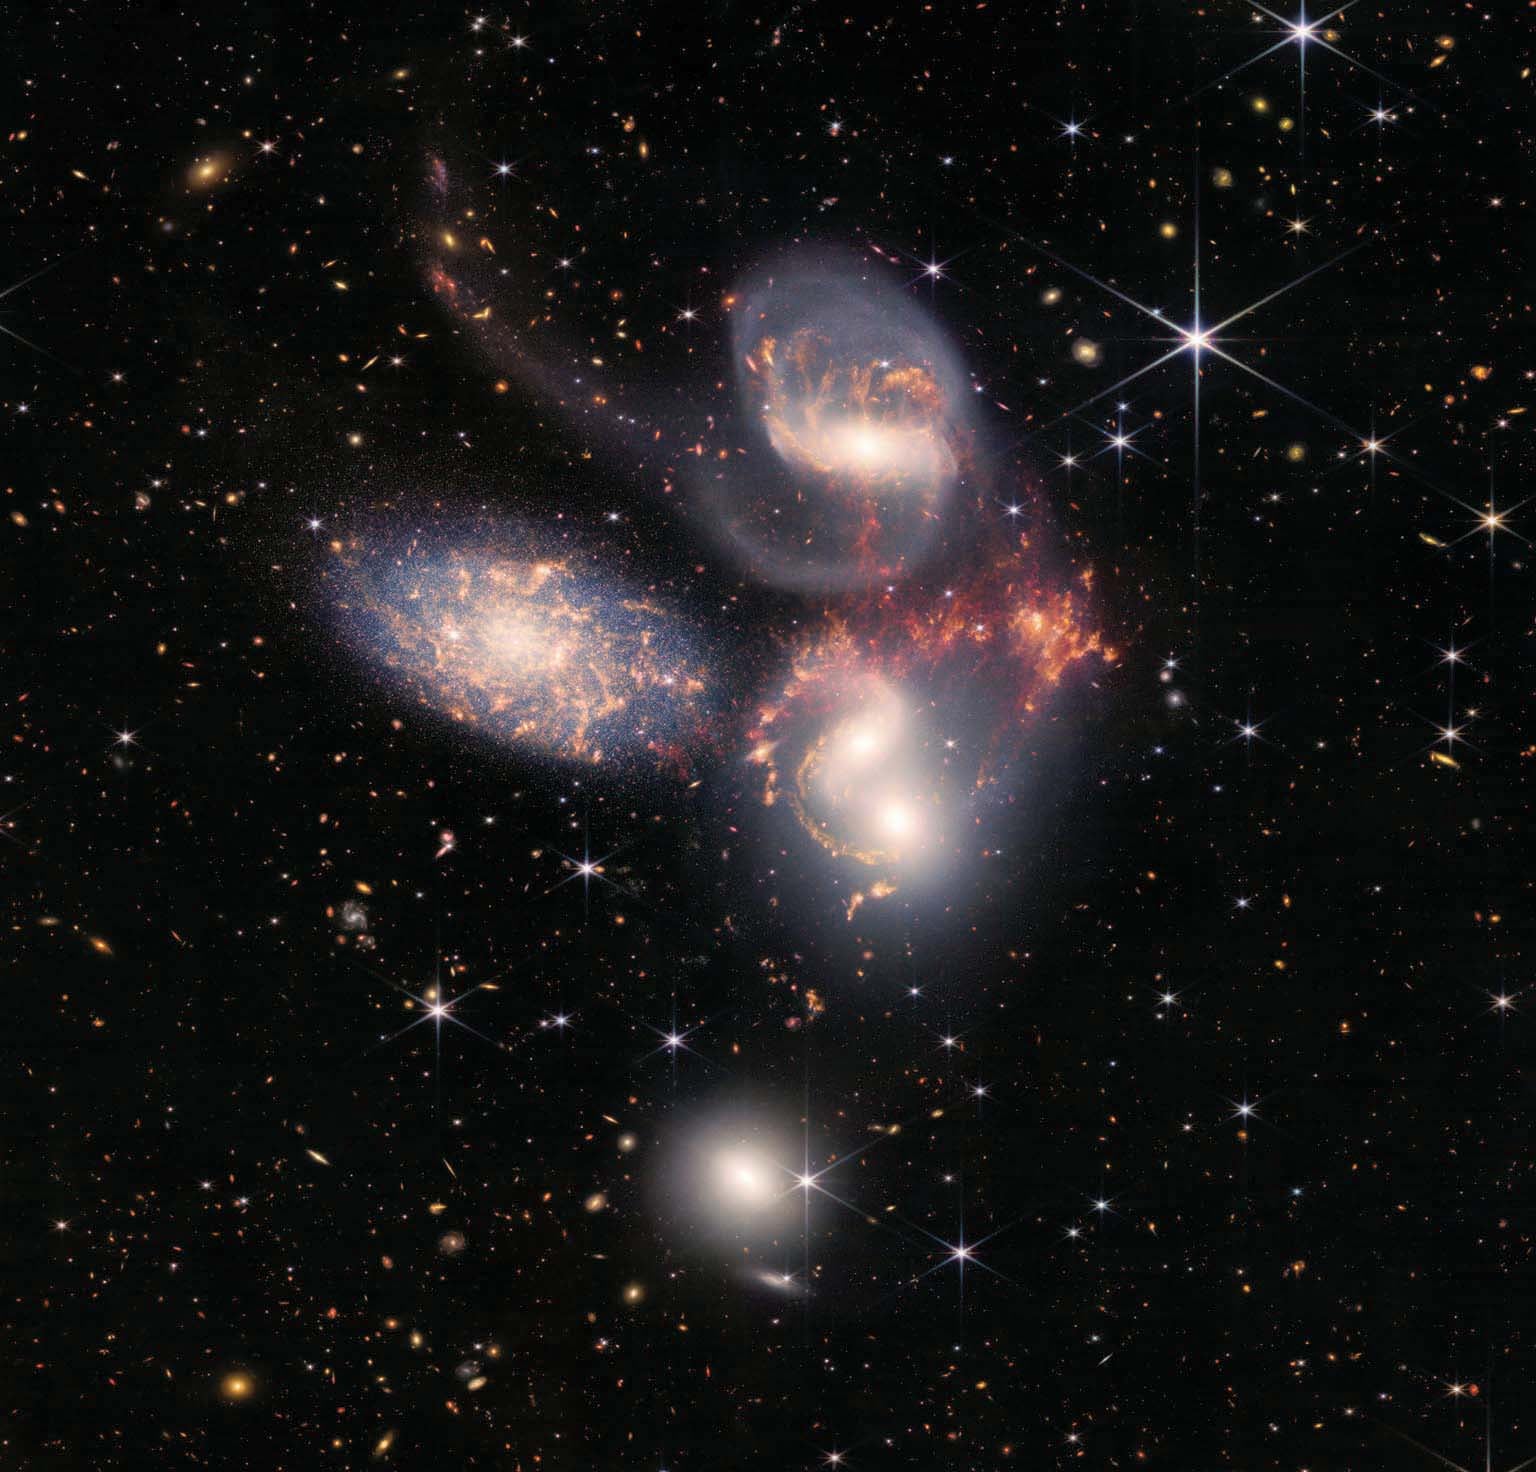 The interacting galaxies of Stephan’s Quintet.